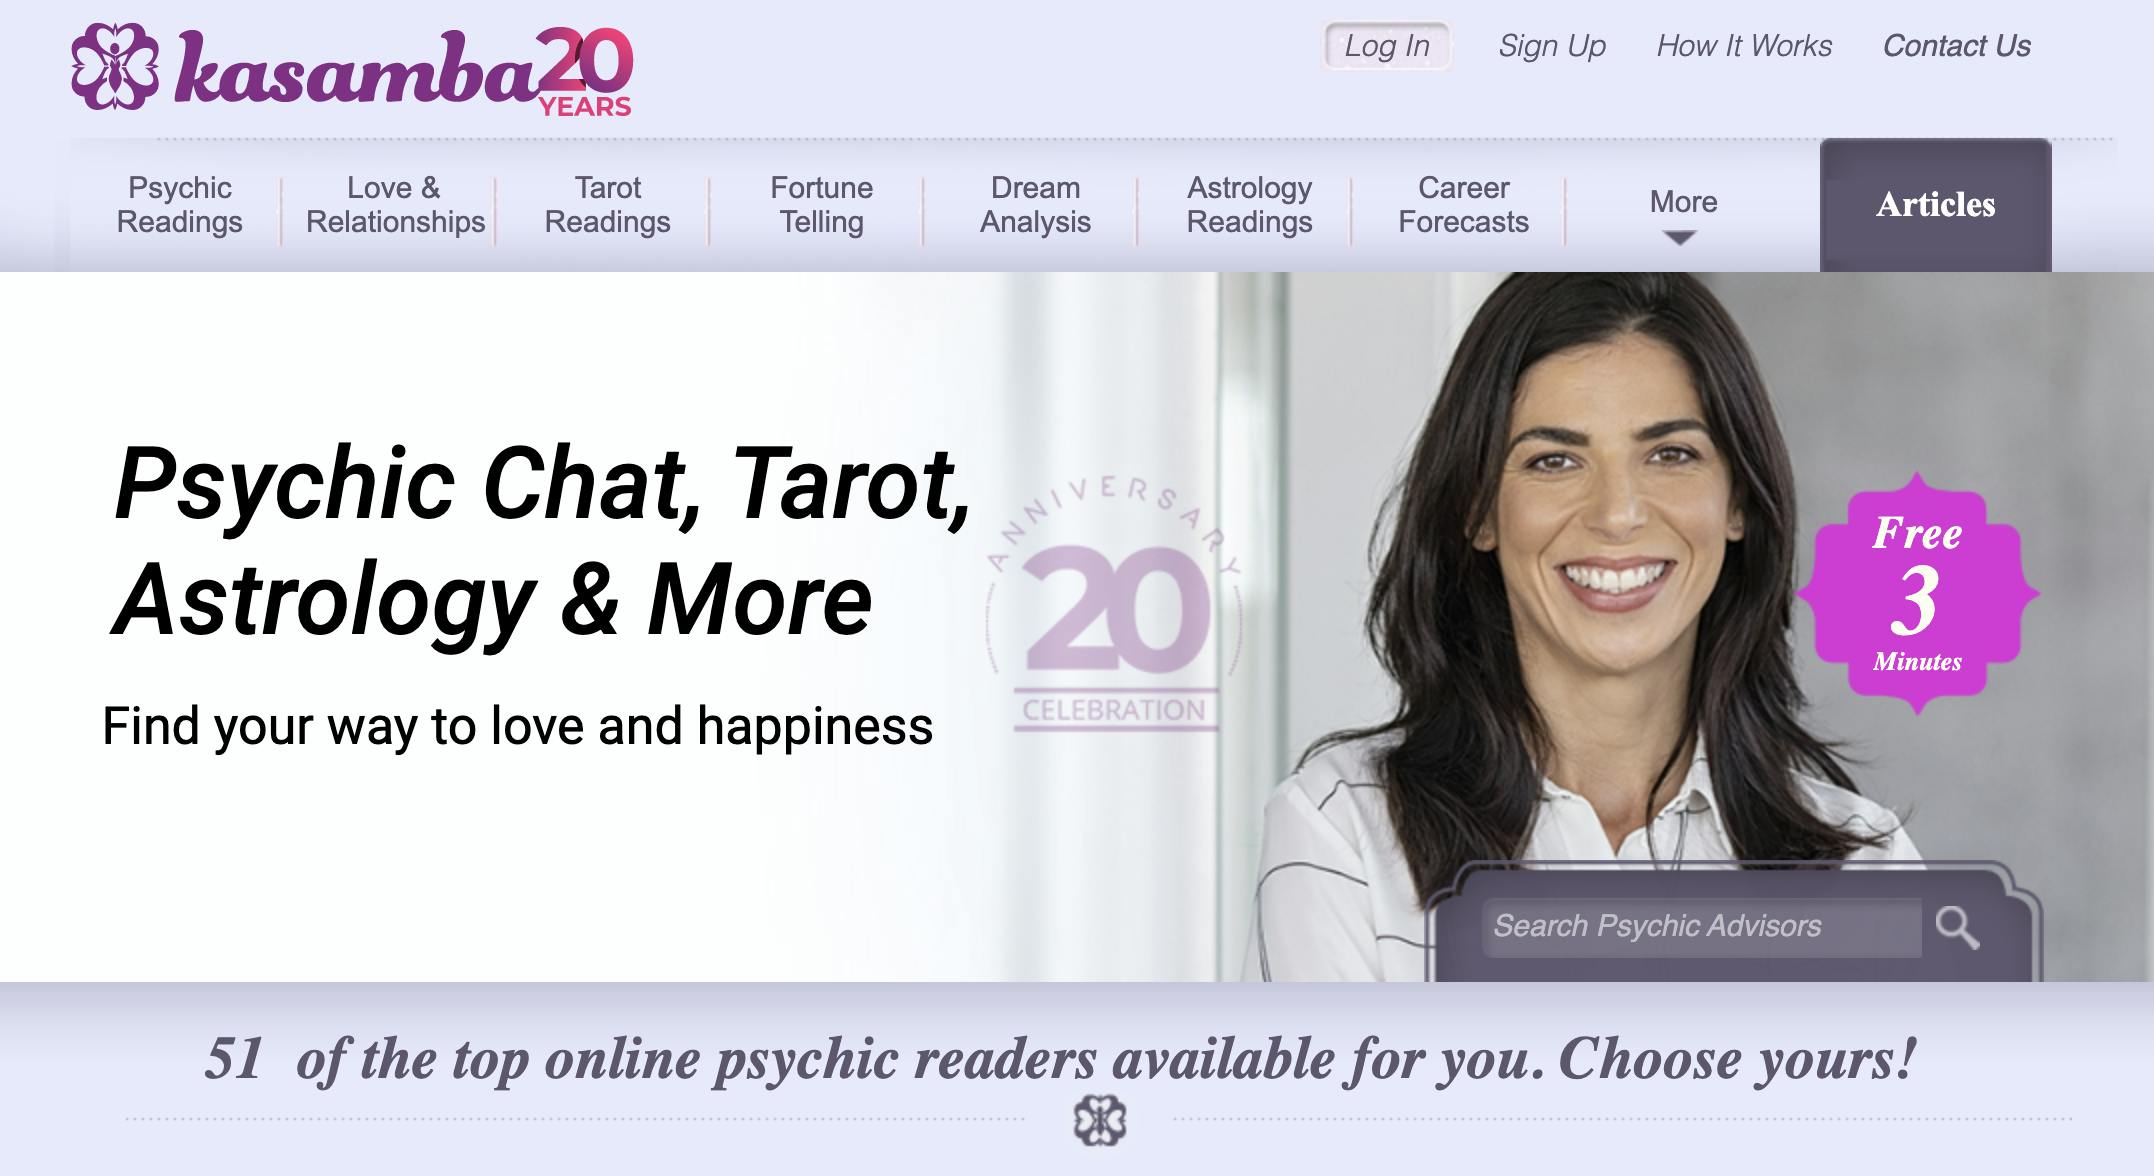 Screenshot of the Kasamba homepage displaying the services offered, like tarot, psychic reading, and compatibility charts for aries men and women.